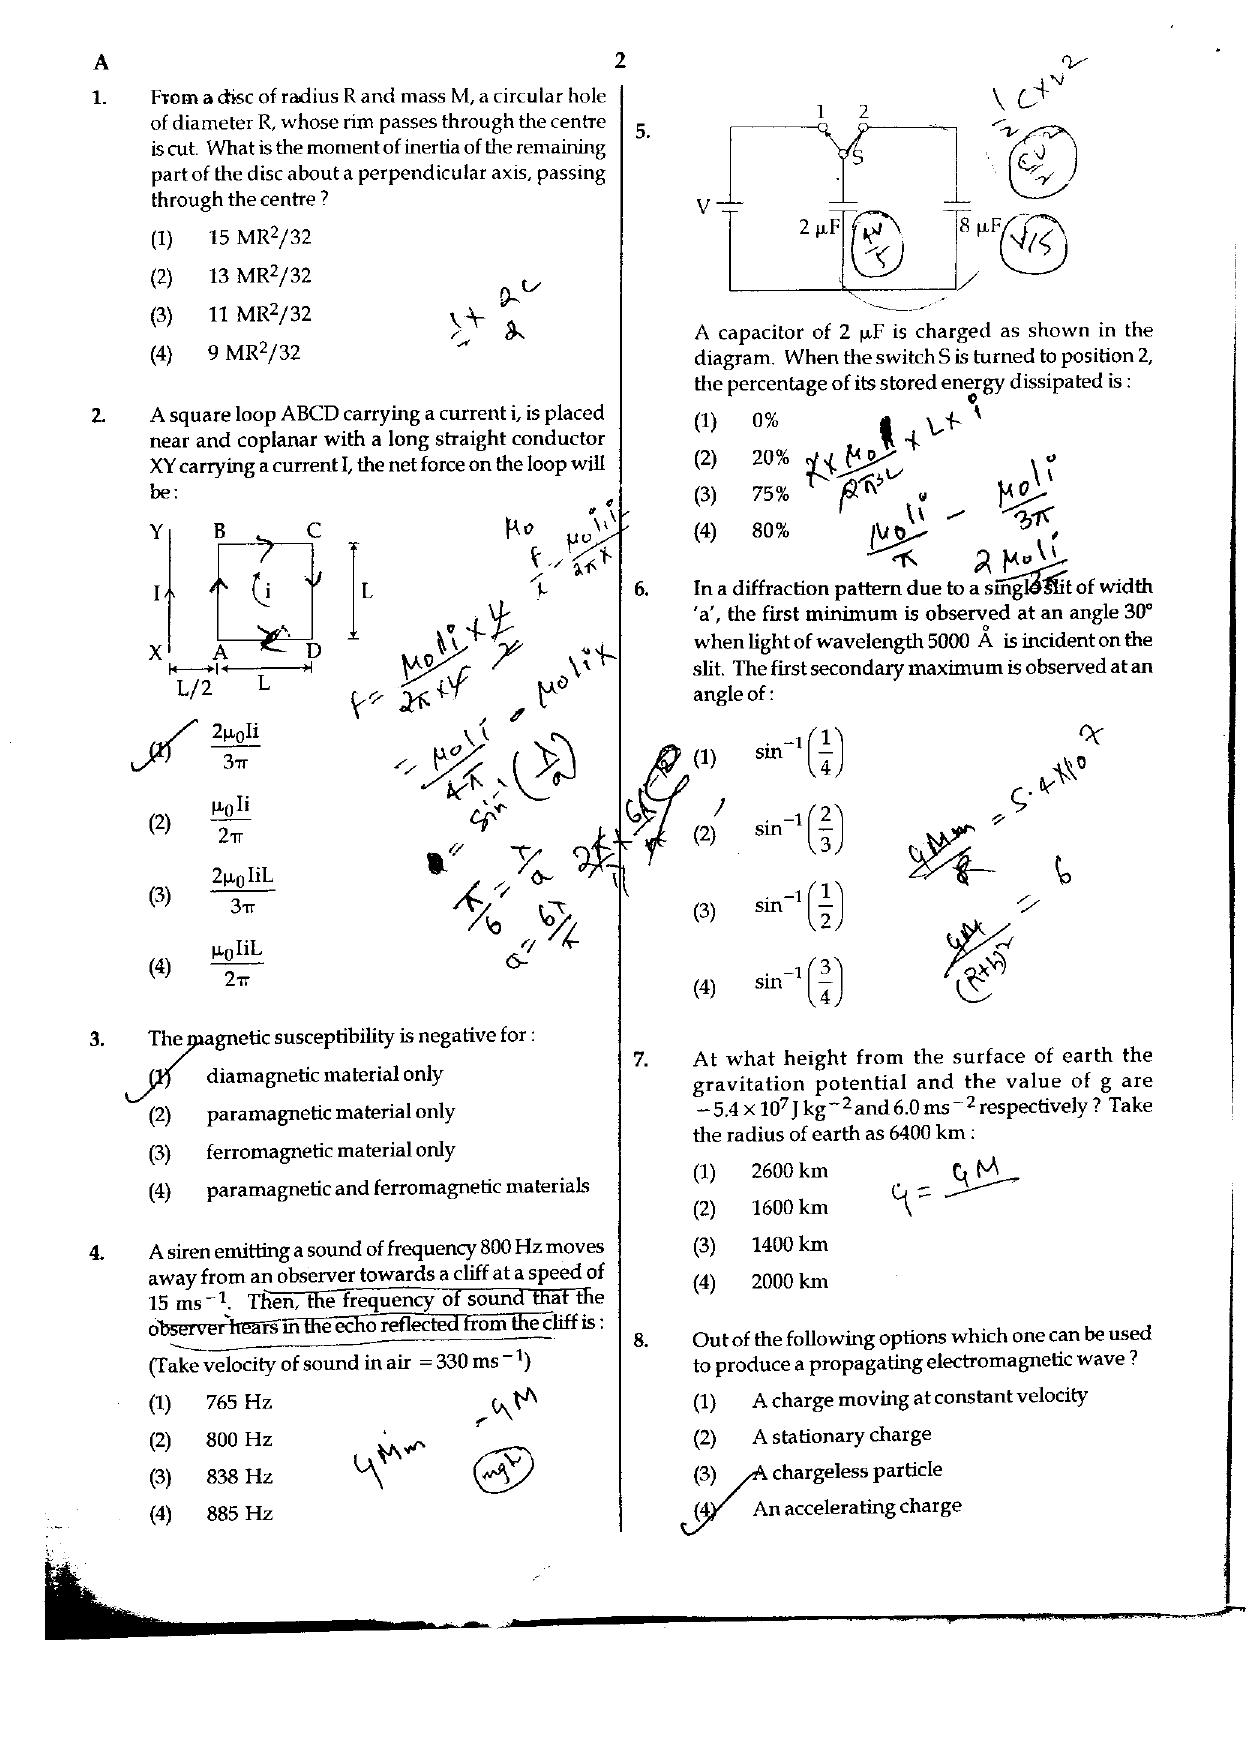 NEET Code A/ P/ W 2016 Question Paper - Page 2